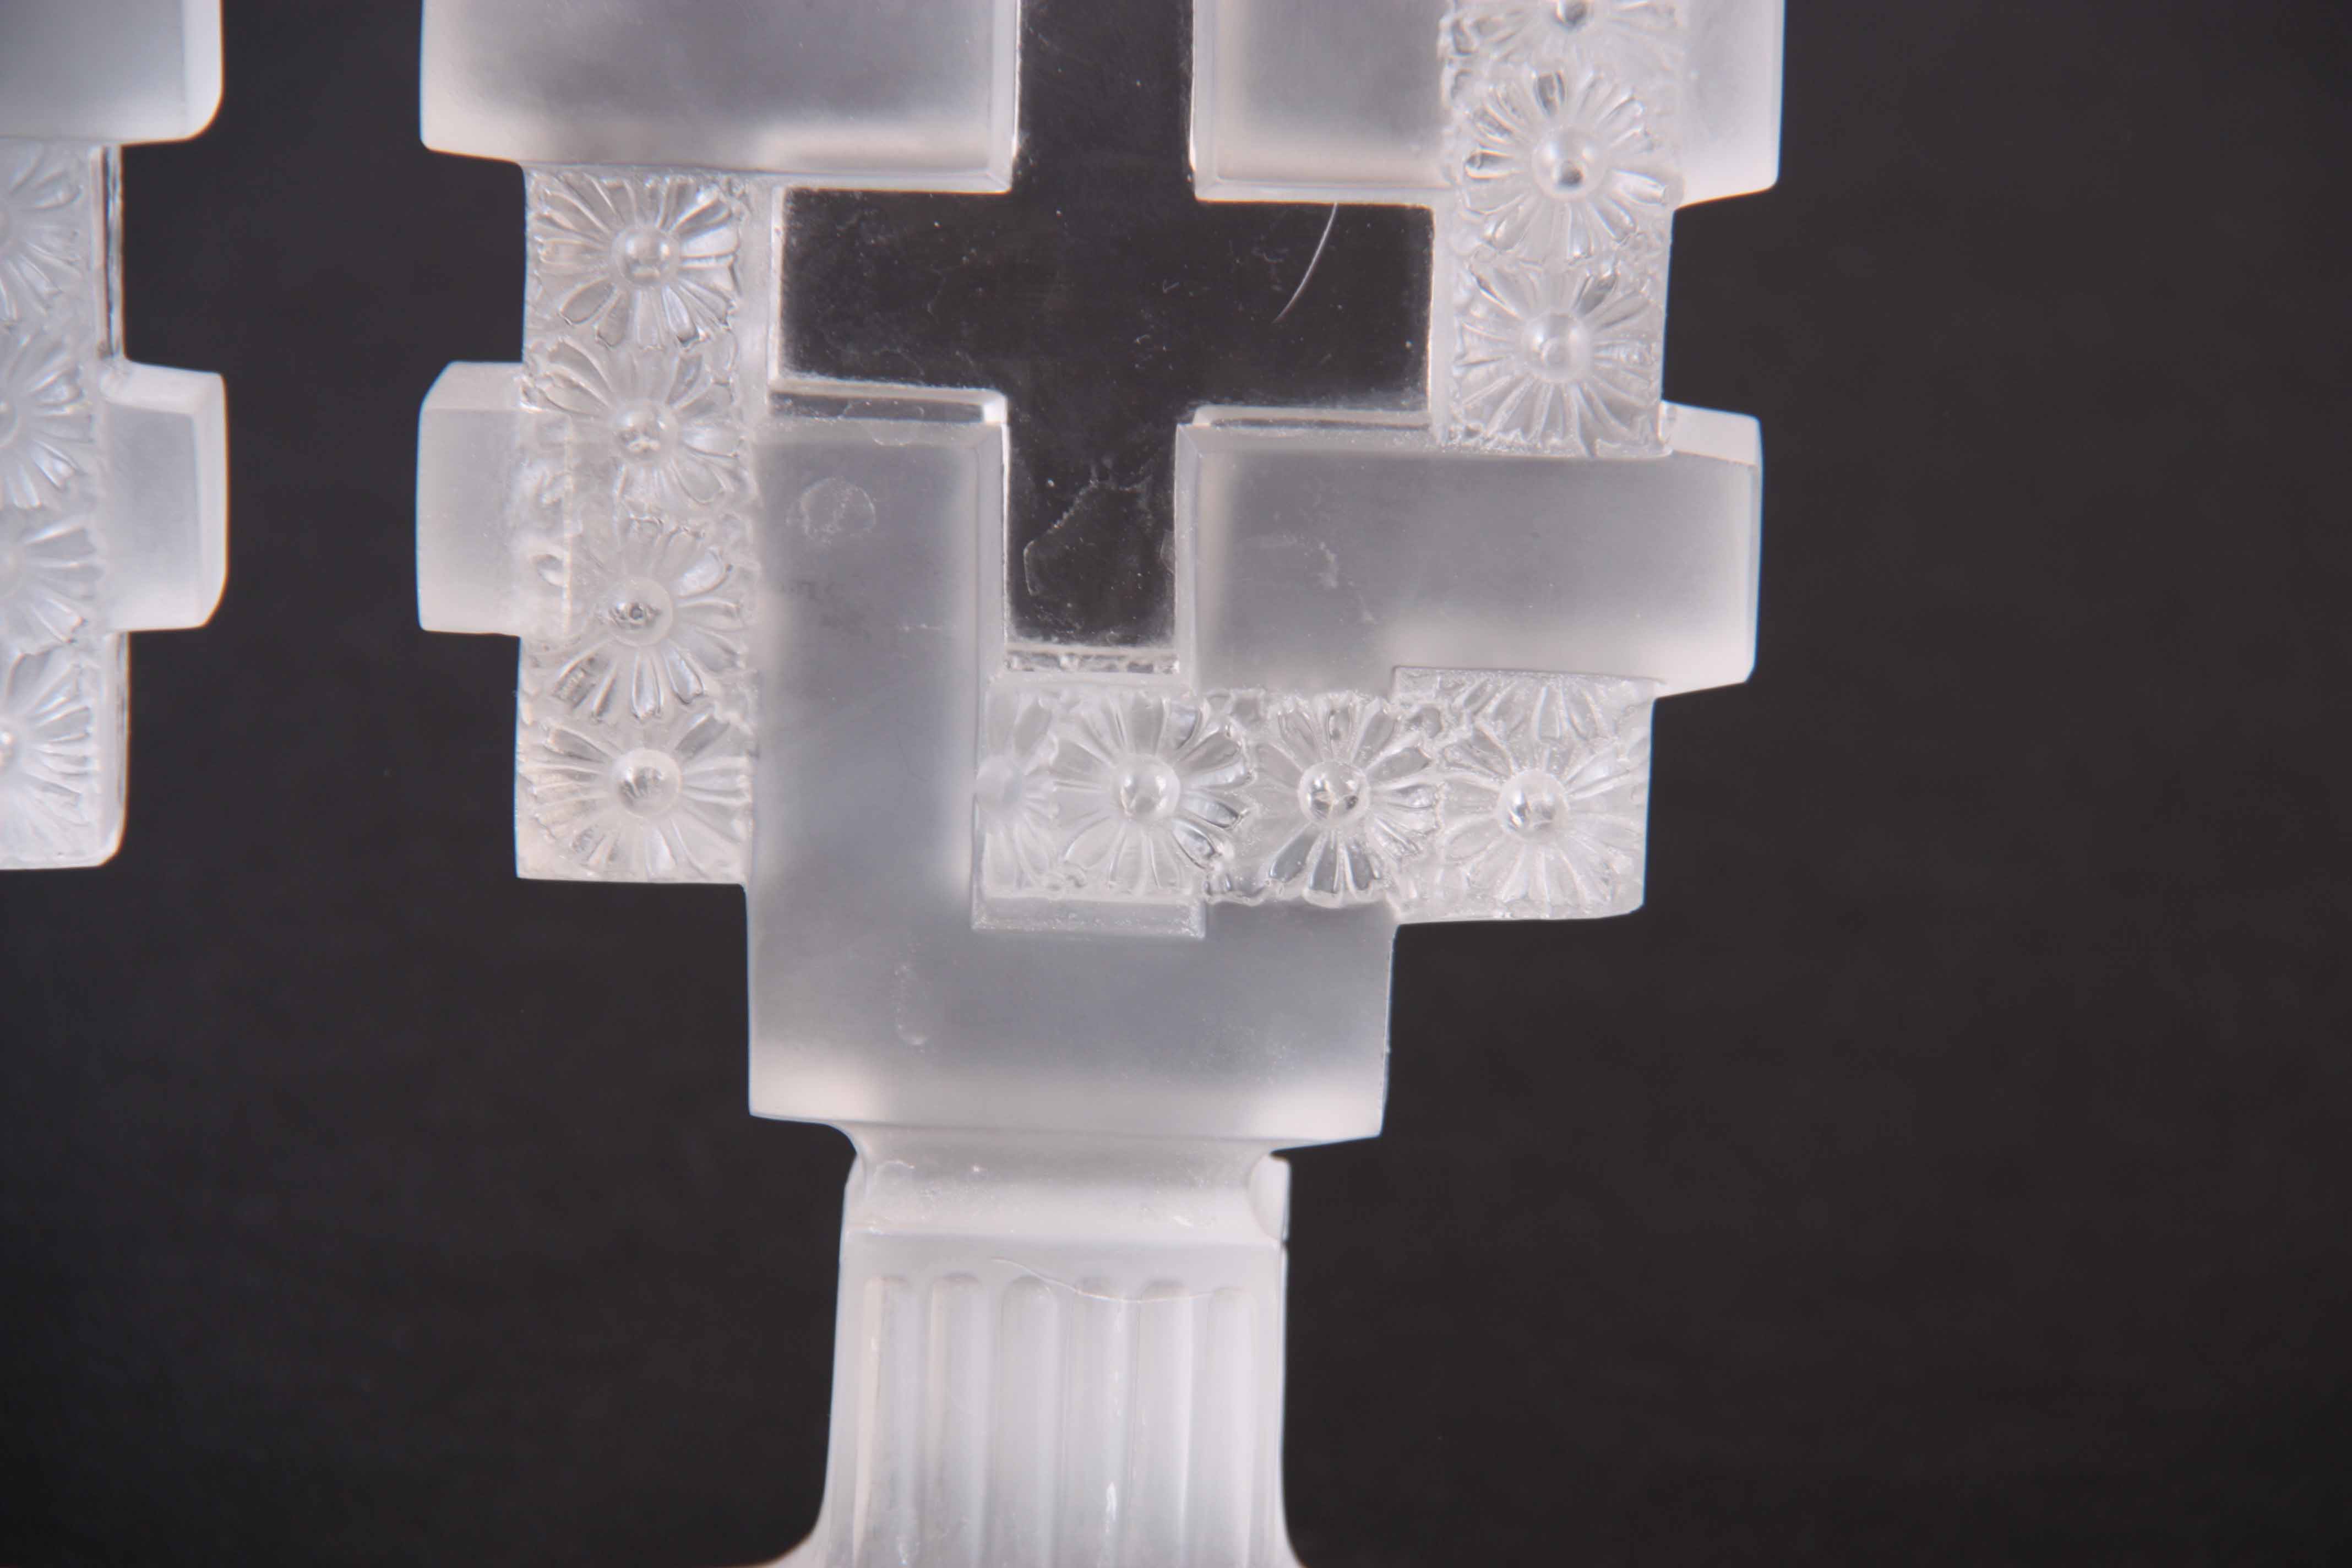 R. LALIQUE A PAIR OF GLASS PAQUERETTES CANDLESTICKS - impressed R. Lalique 23cm high. - Image 3 of 7